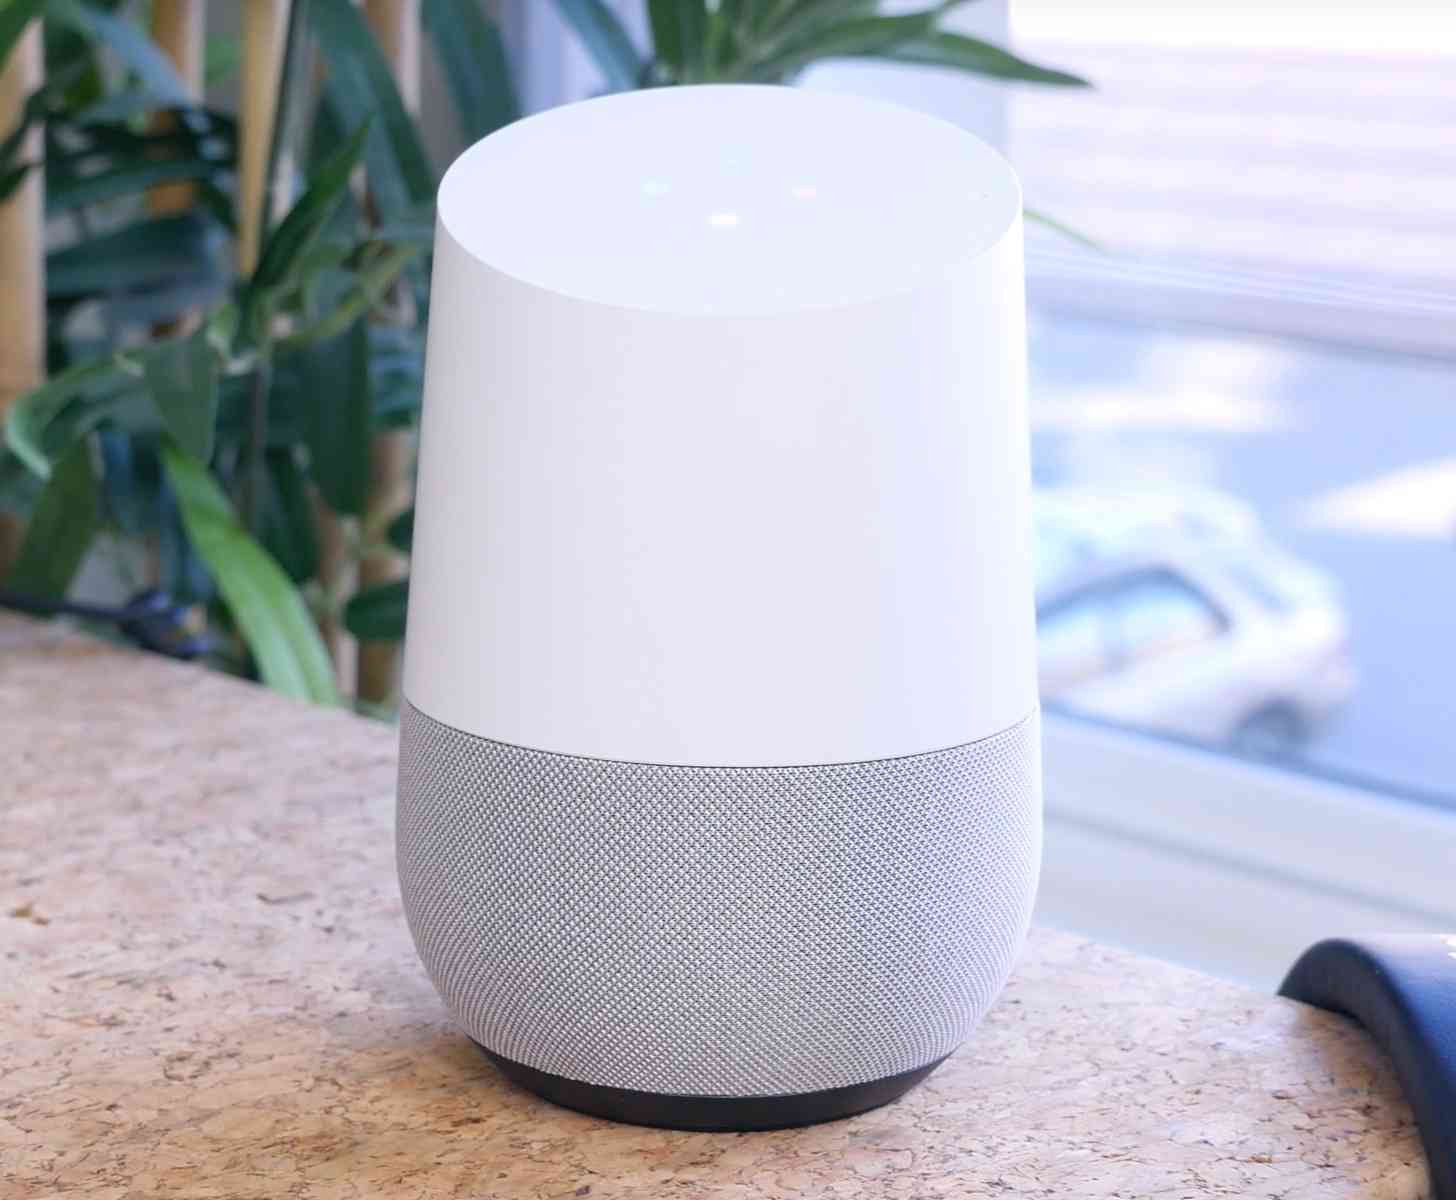 Google Home hands-on